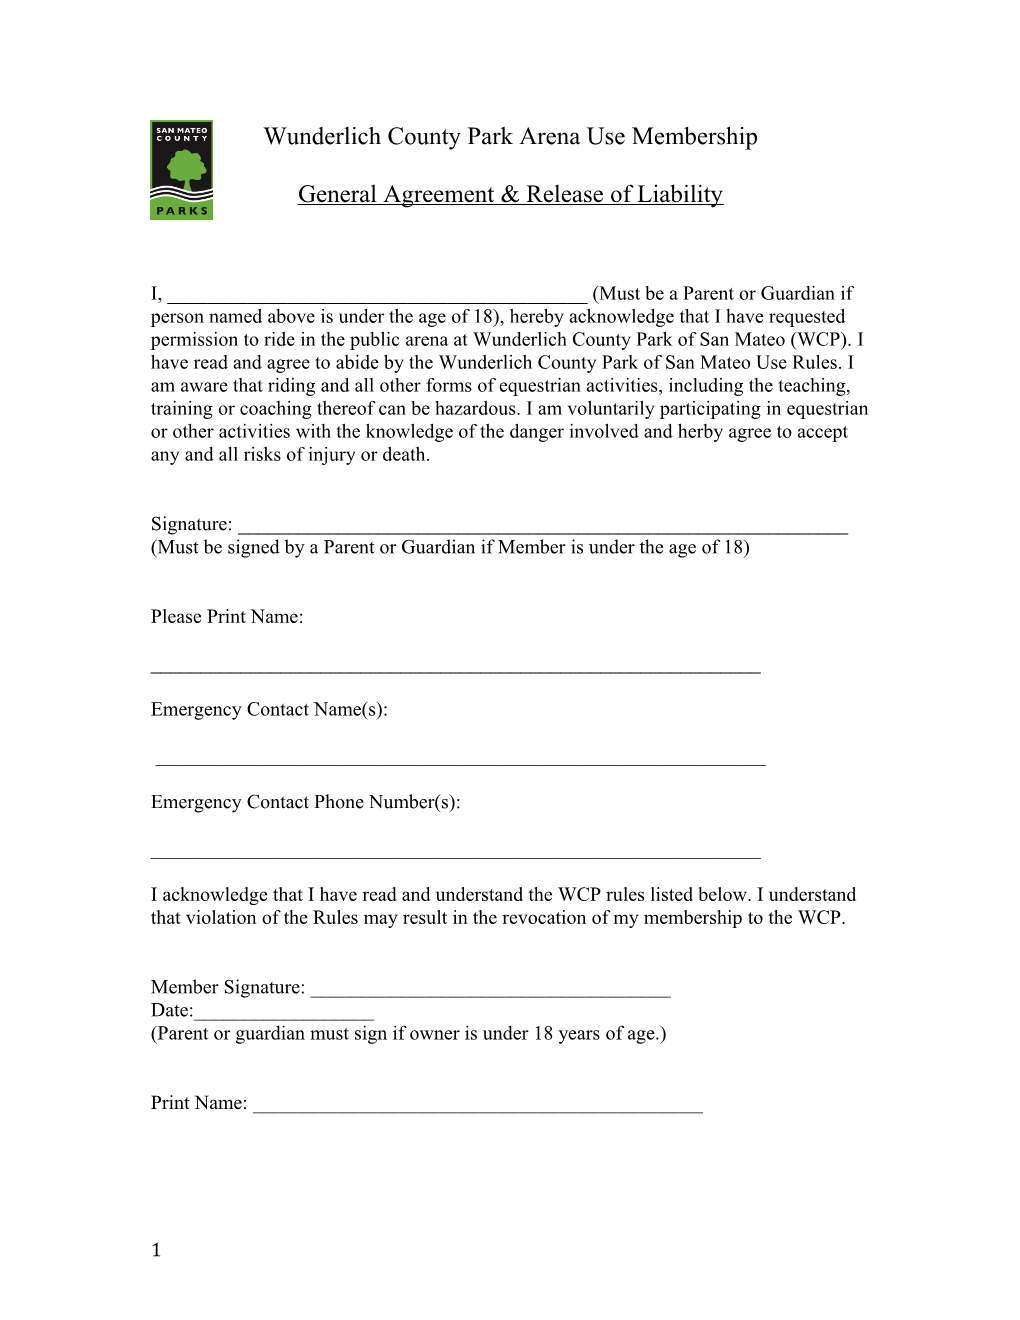 General Agreement & Release of Liability